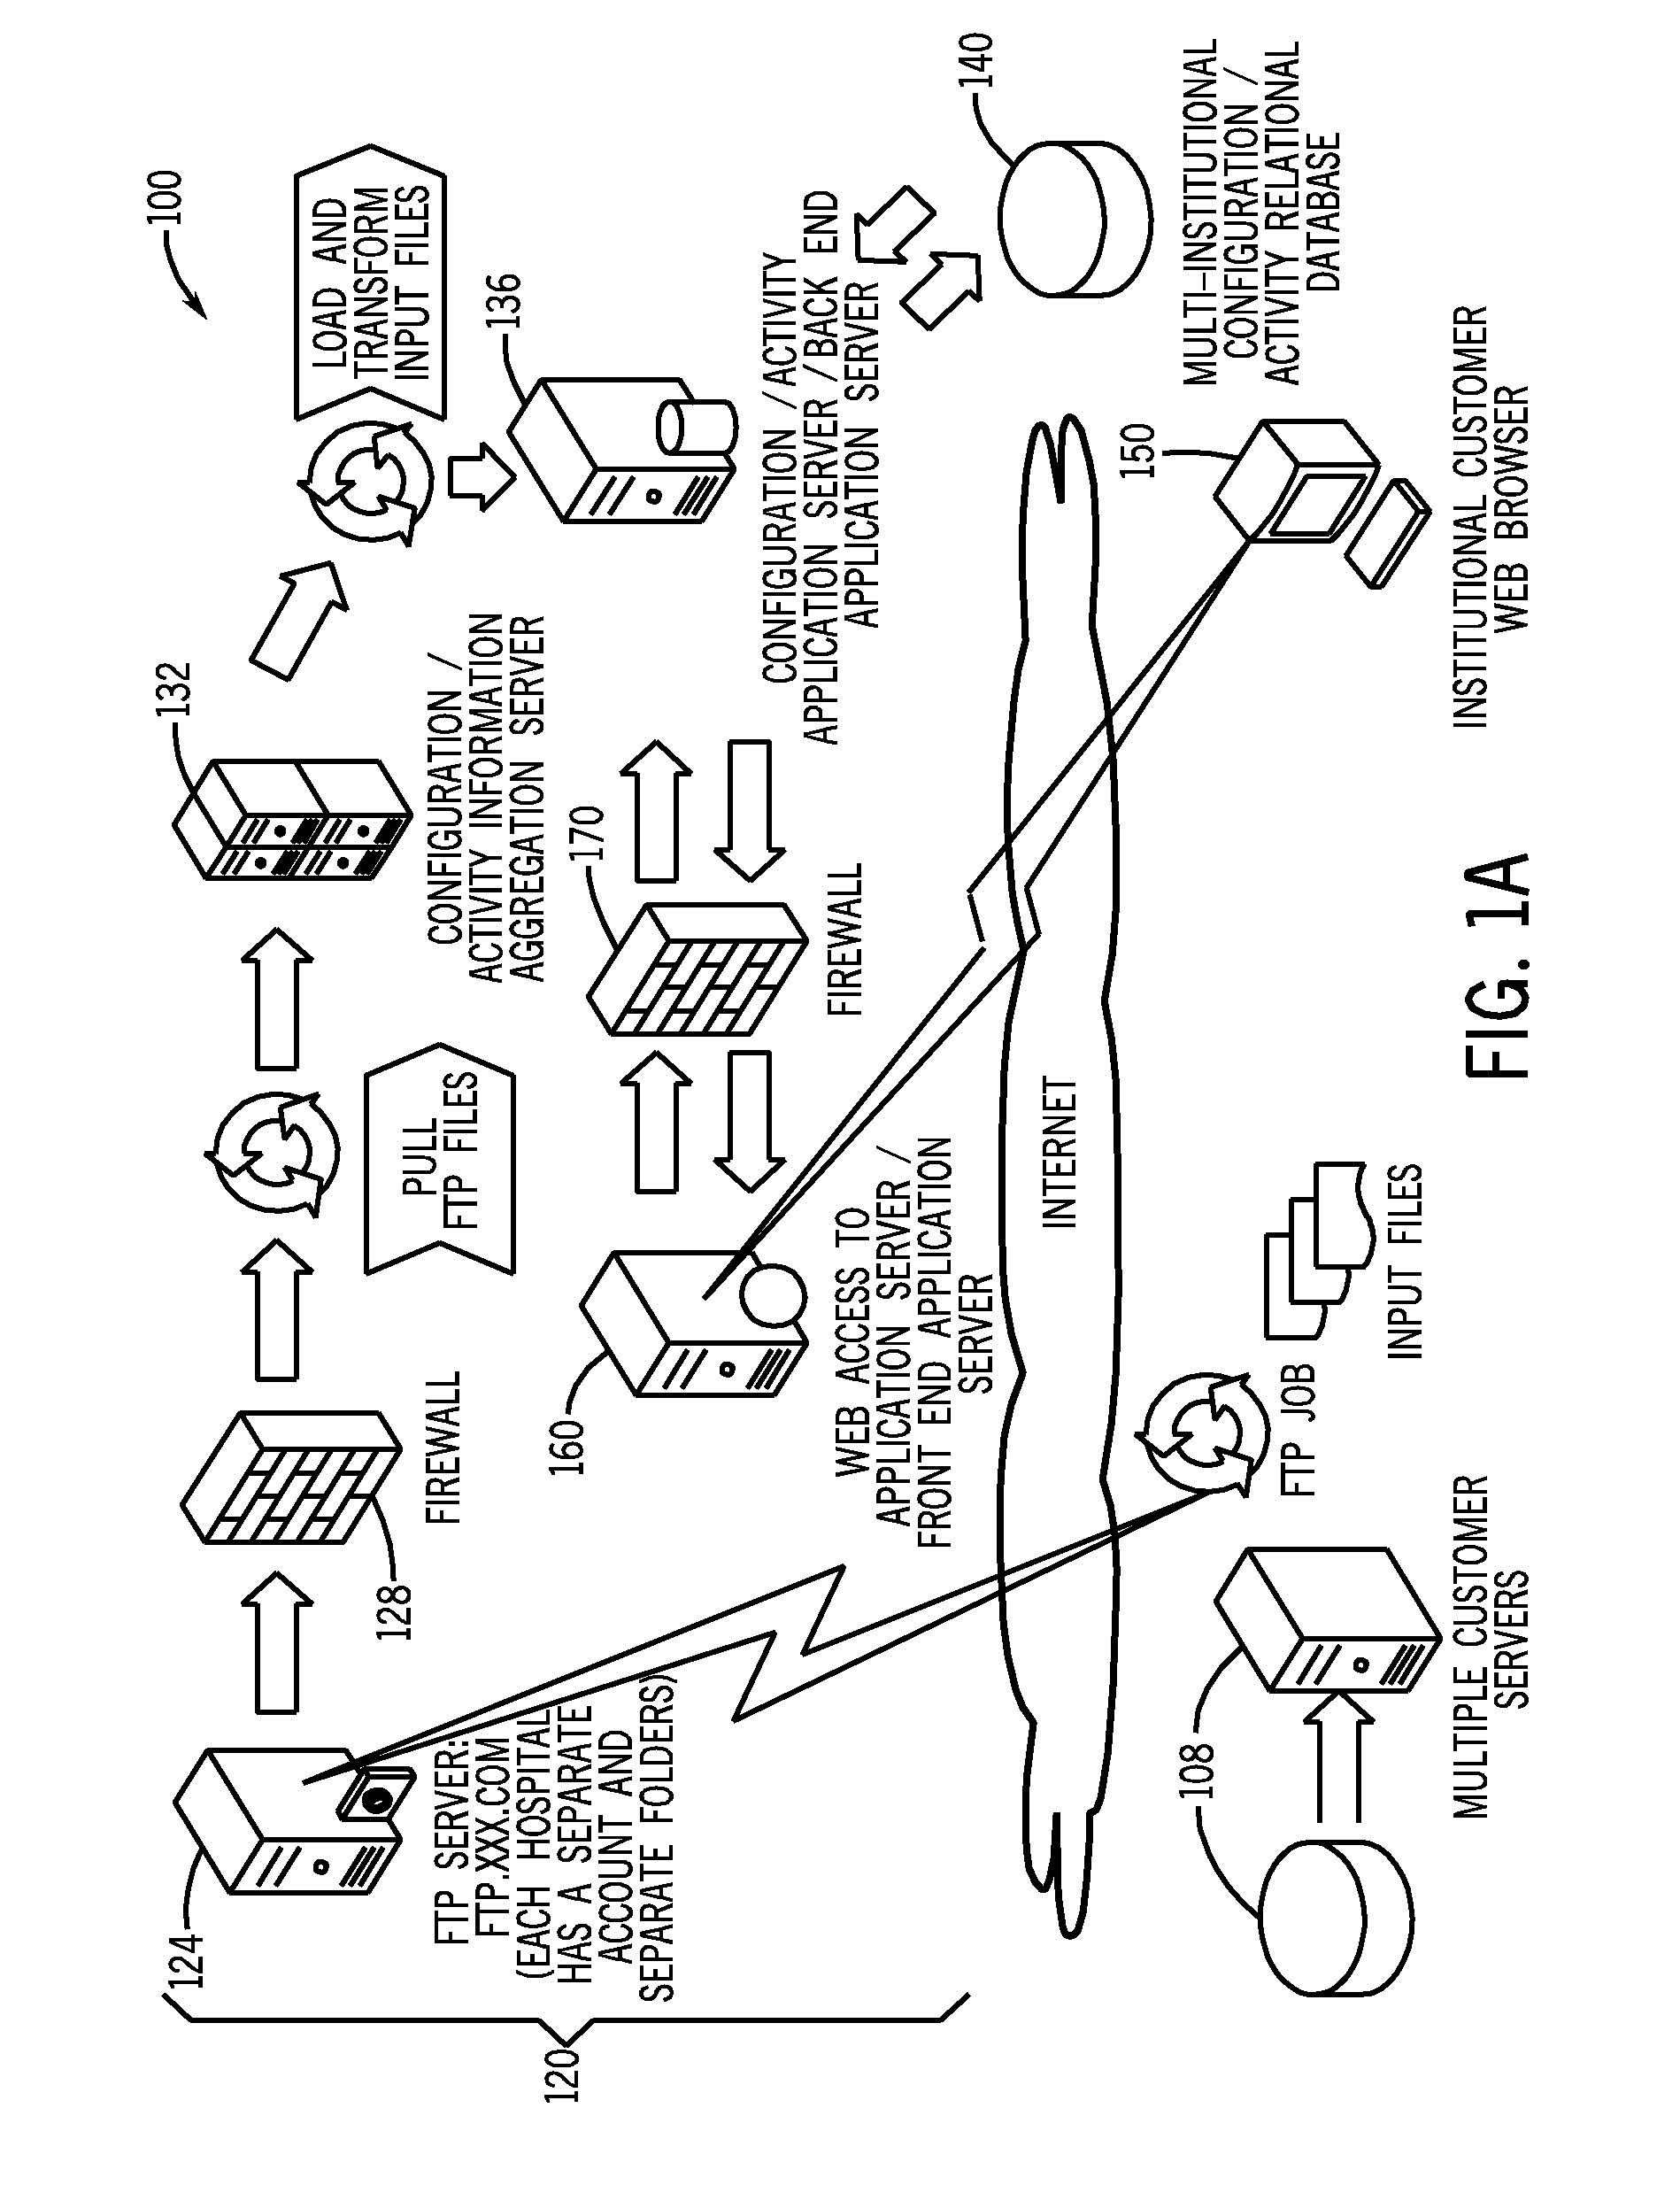 System and method for comparing and utilizing activity information and configuration information from multiple medical device management systems